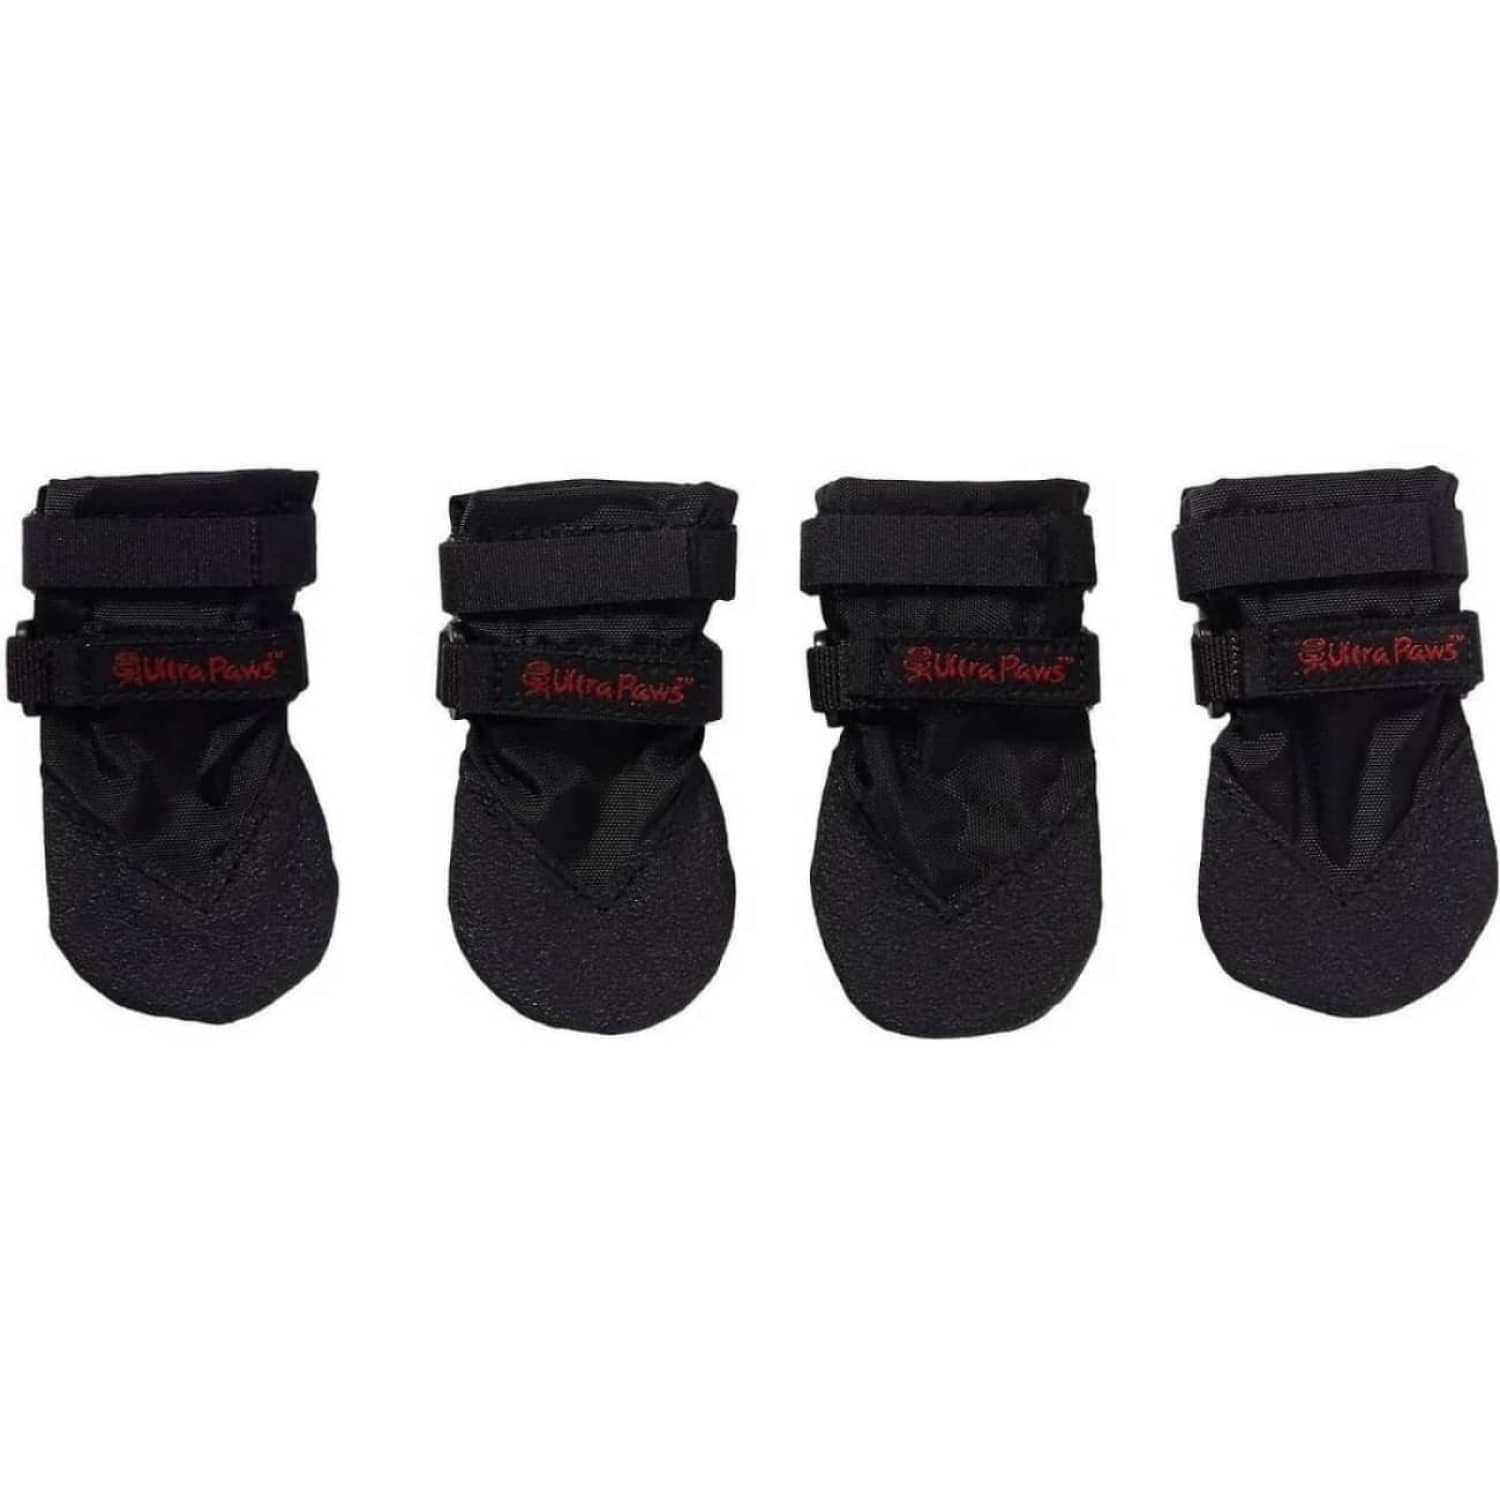 Ultra Paws Durable Dog Boots black set